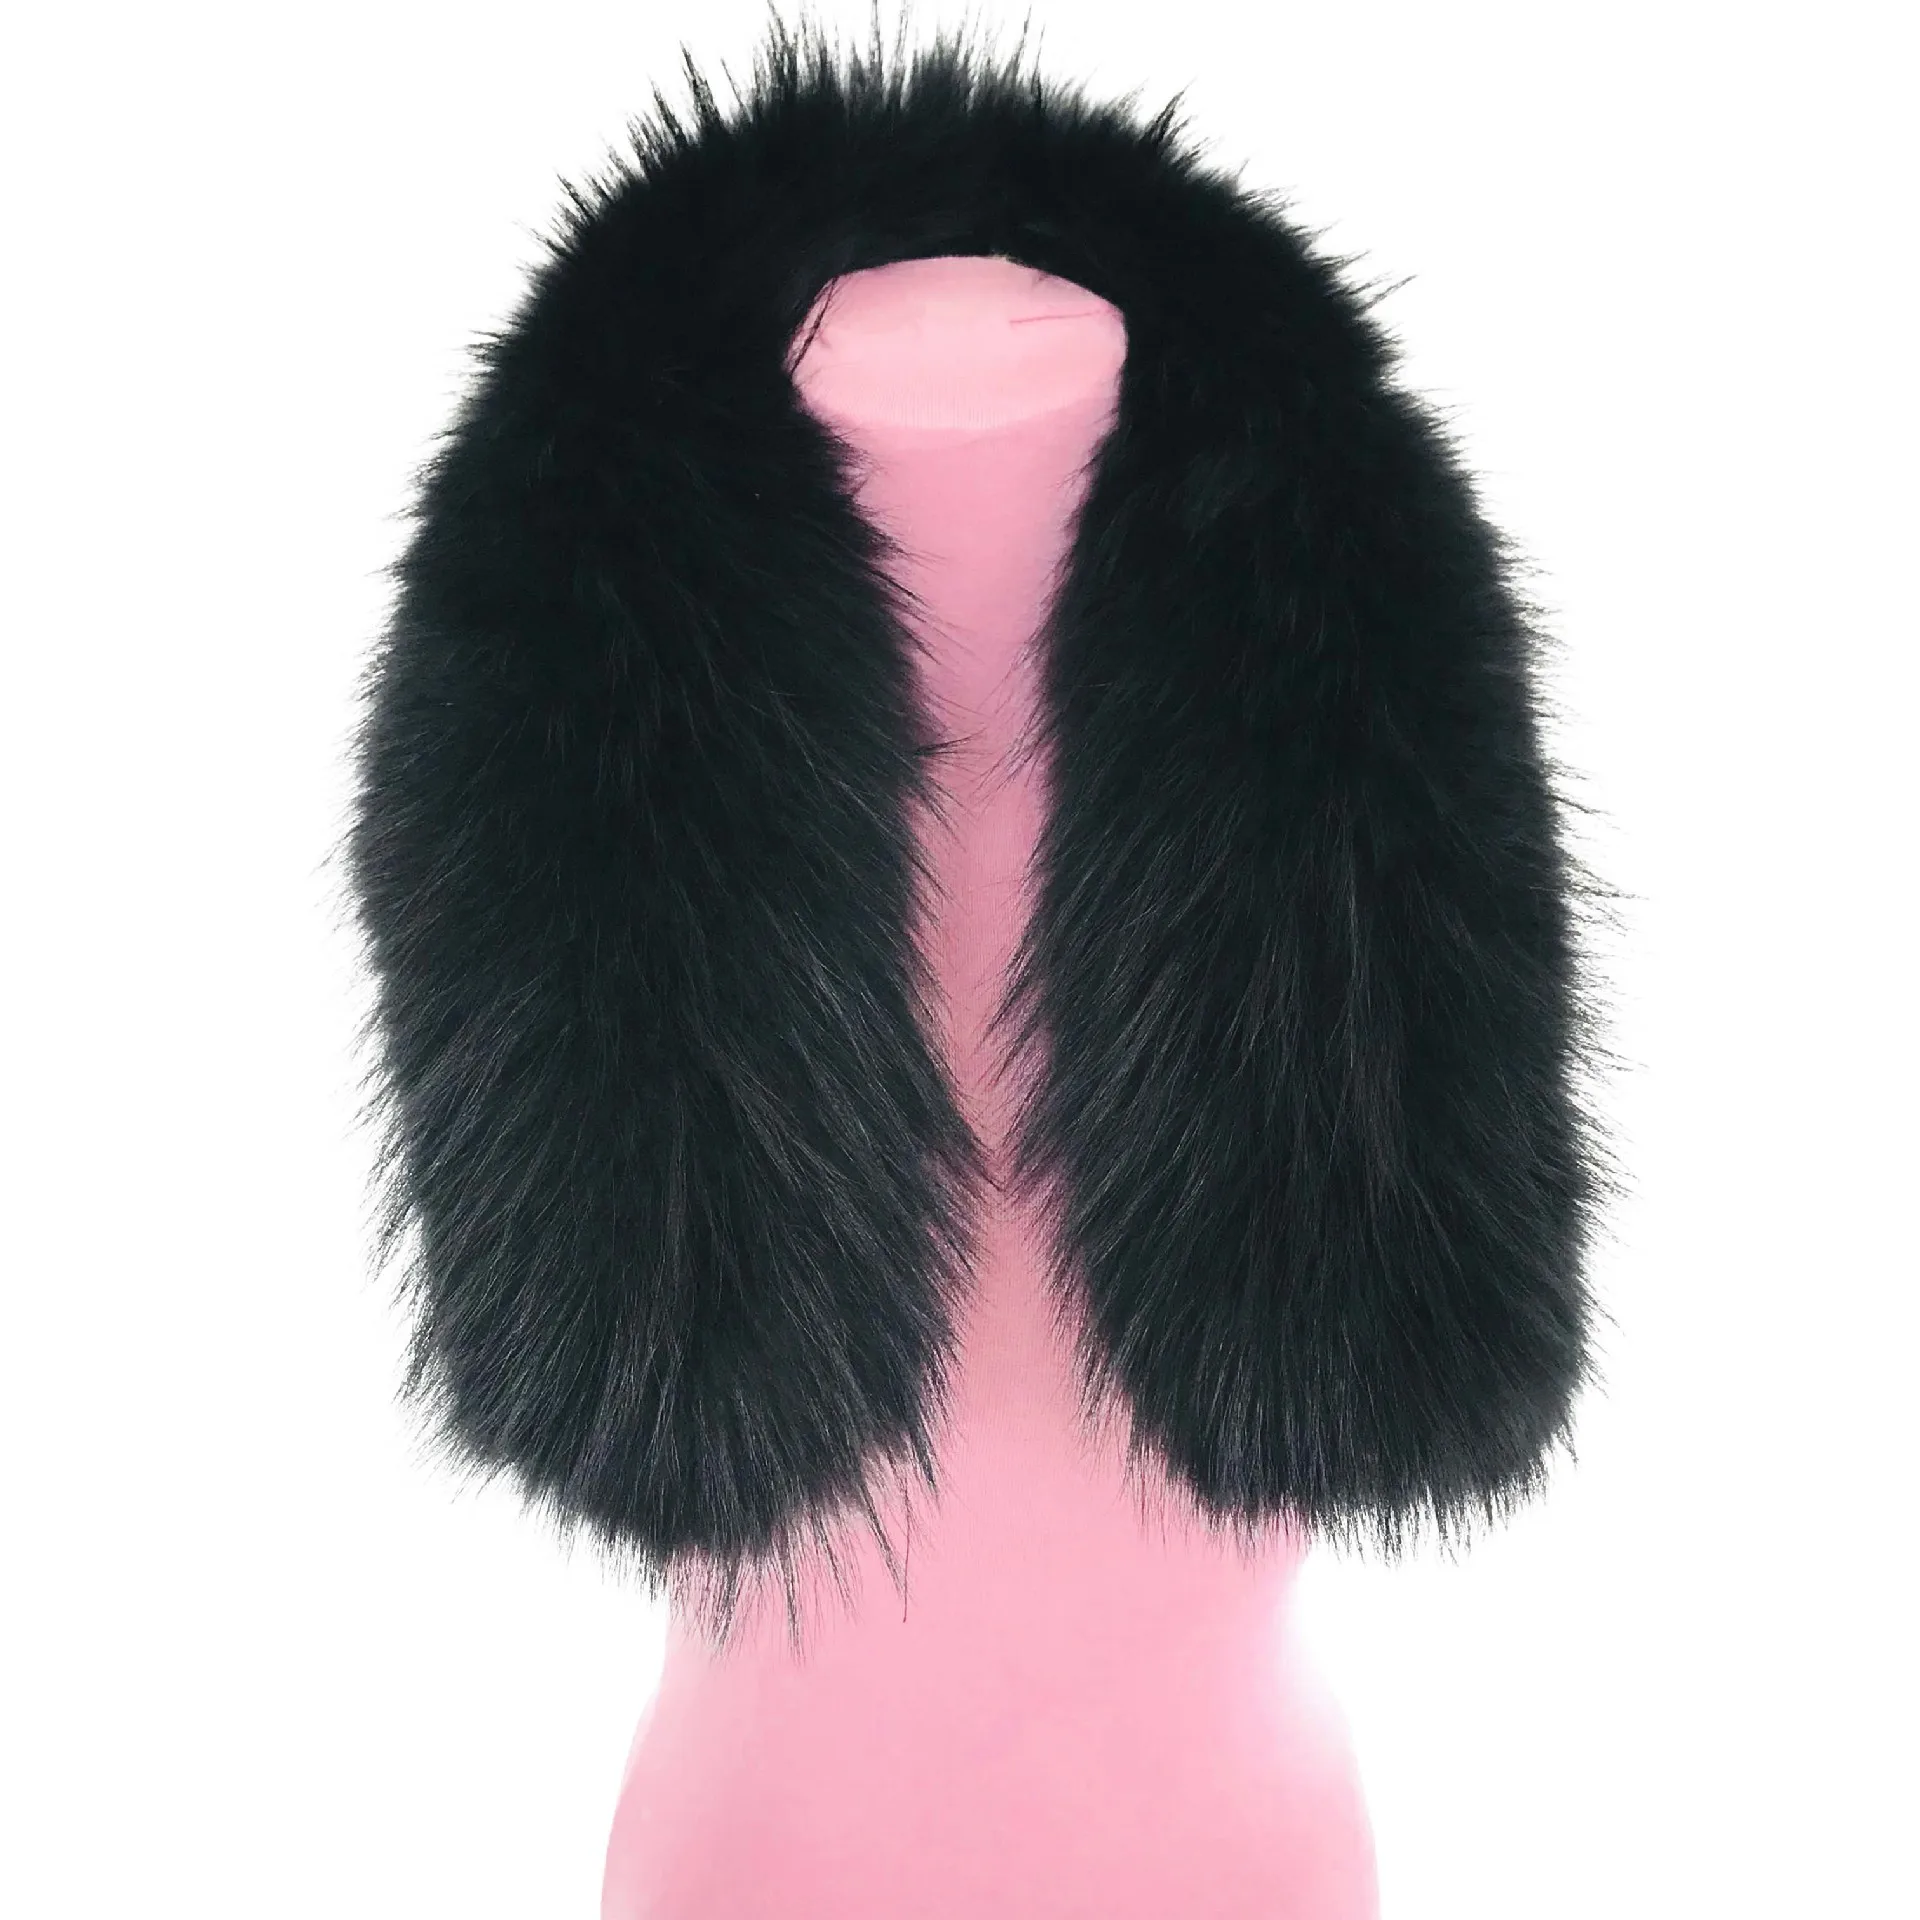 

JKP 2020 Real Mink Fur Collar for Women Winter Natural Animal Fur Shawl and Wraps Warm Fashion Scarf High Quality